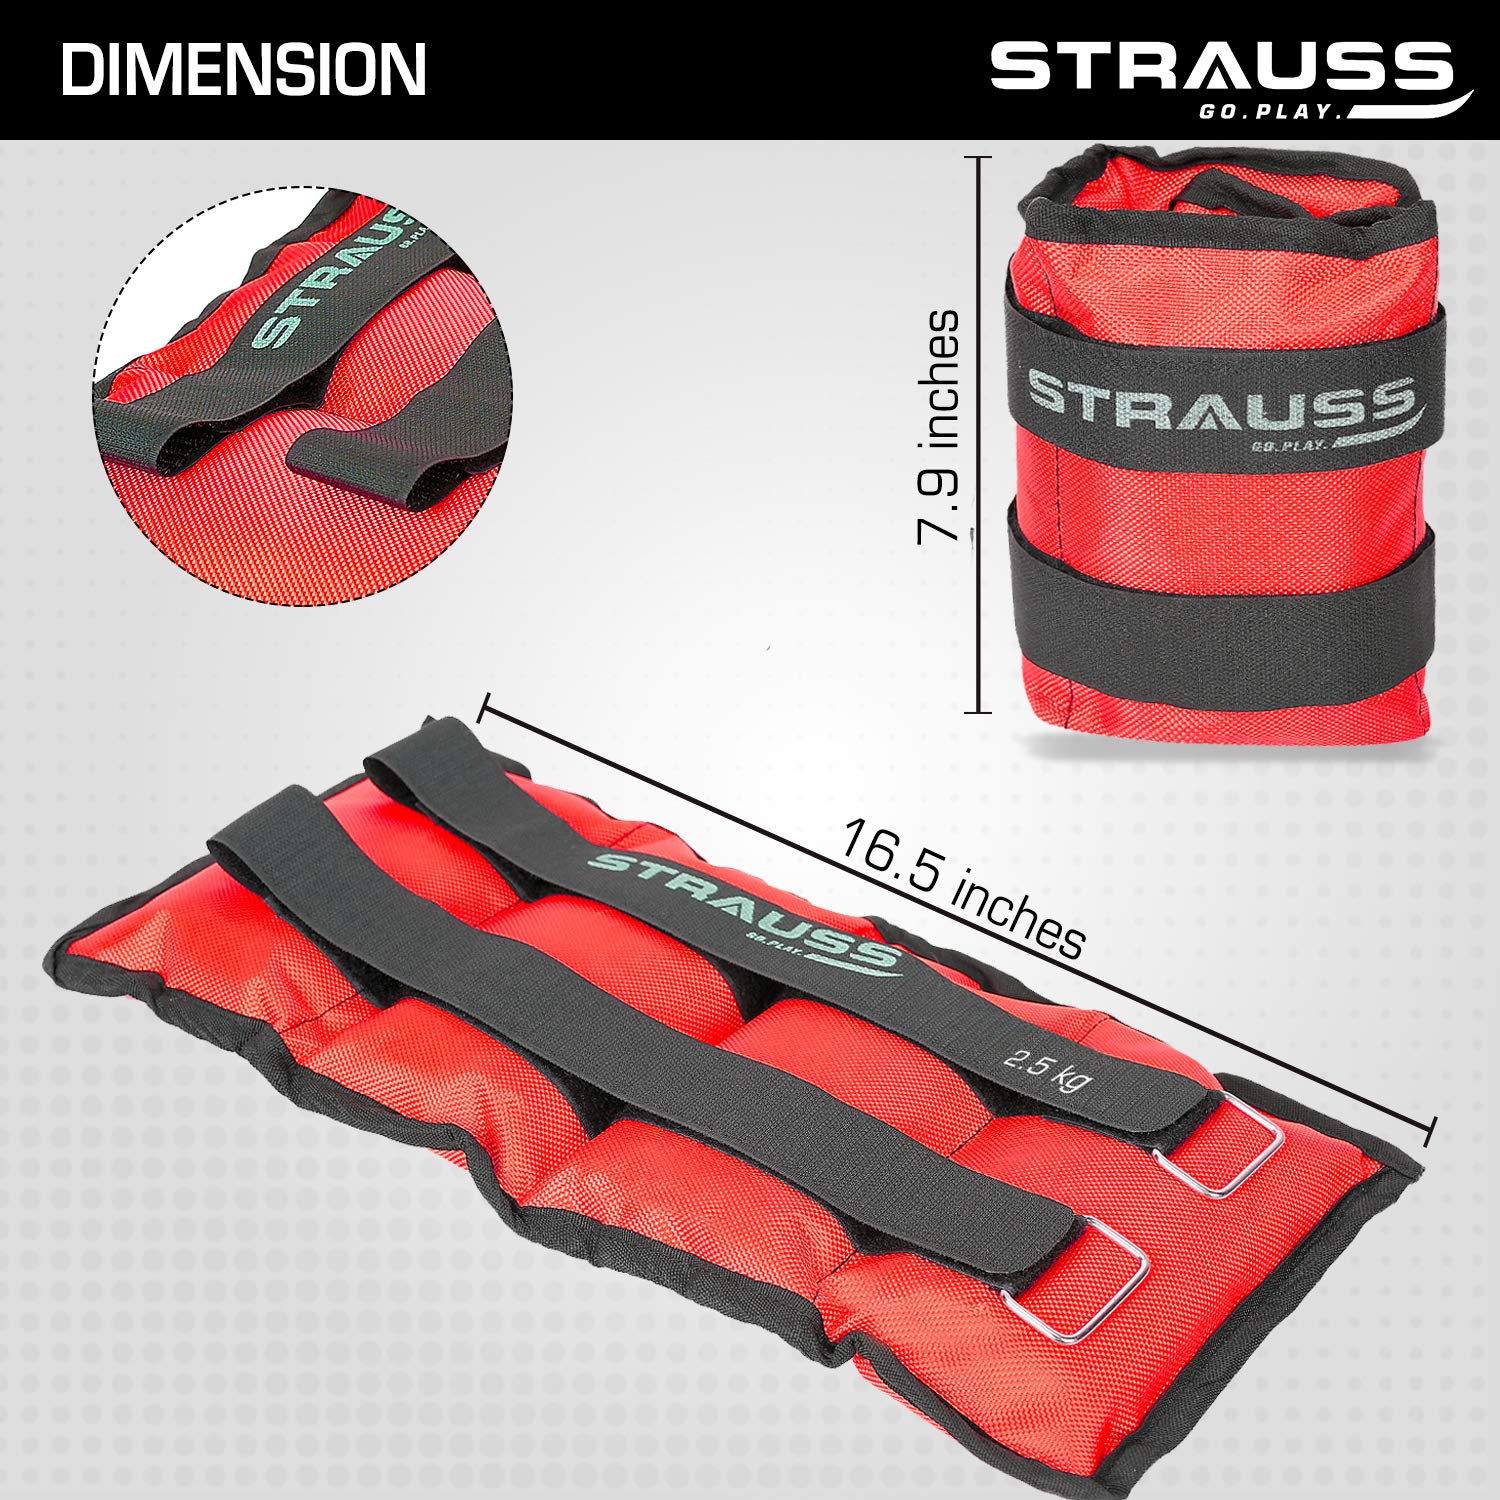 Strauss Adjustable Ankle/Wrist Weights 2.5 KG X 2 | Ideal for Walking, Running, Jogging, Cycling, Gym, Workout & Strength Training | Easy to Use on Ankle, Wrist, Leg, (Red)